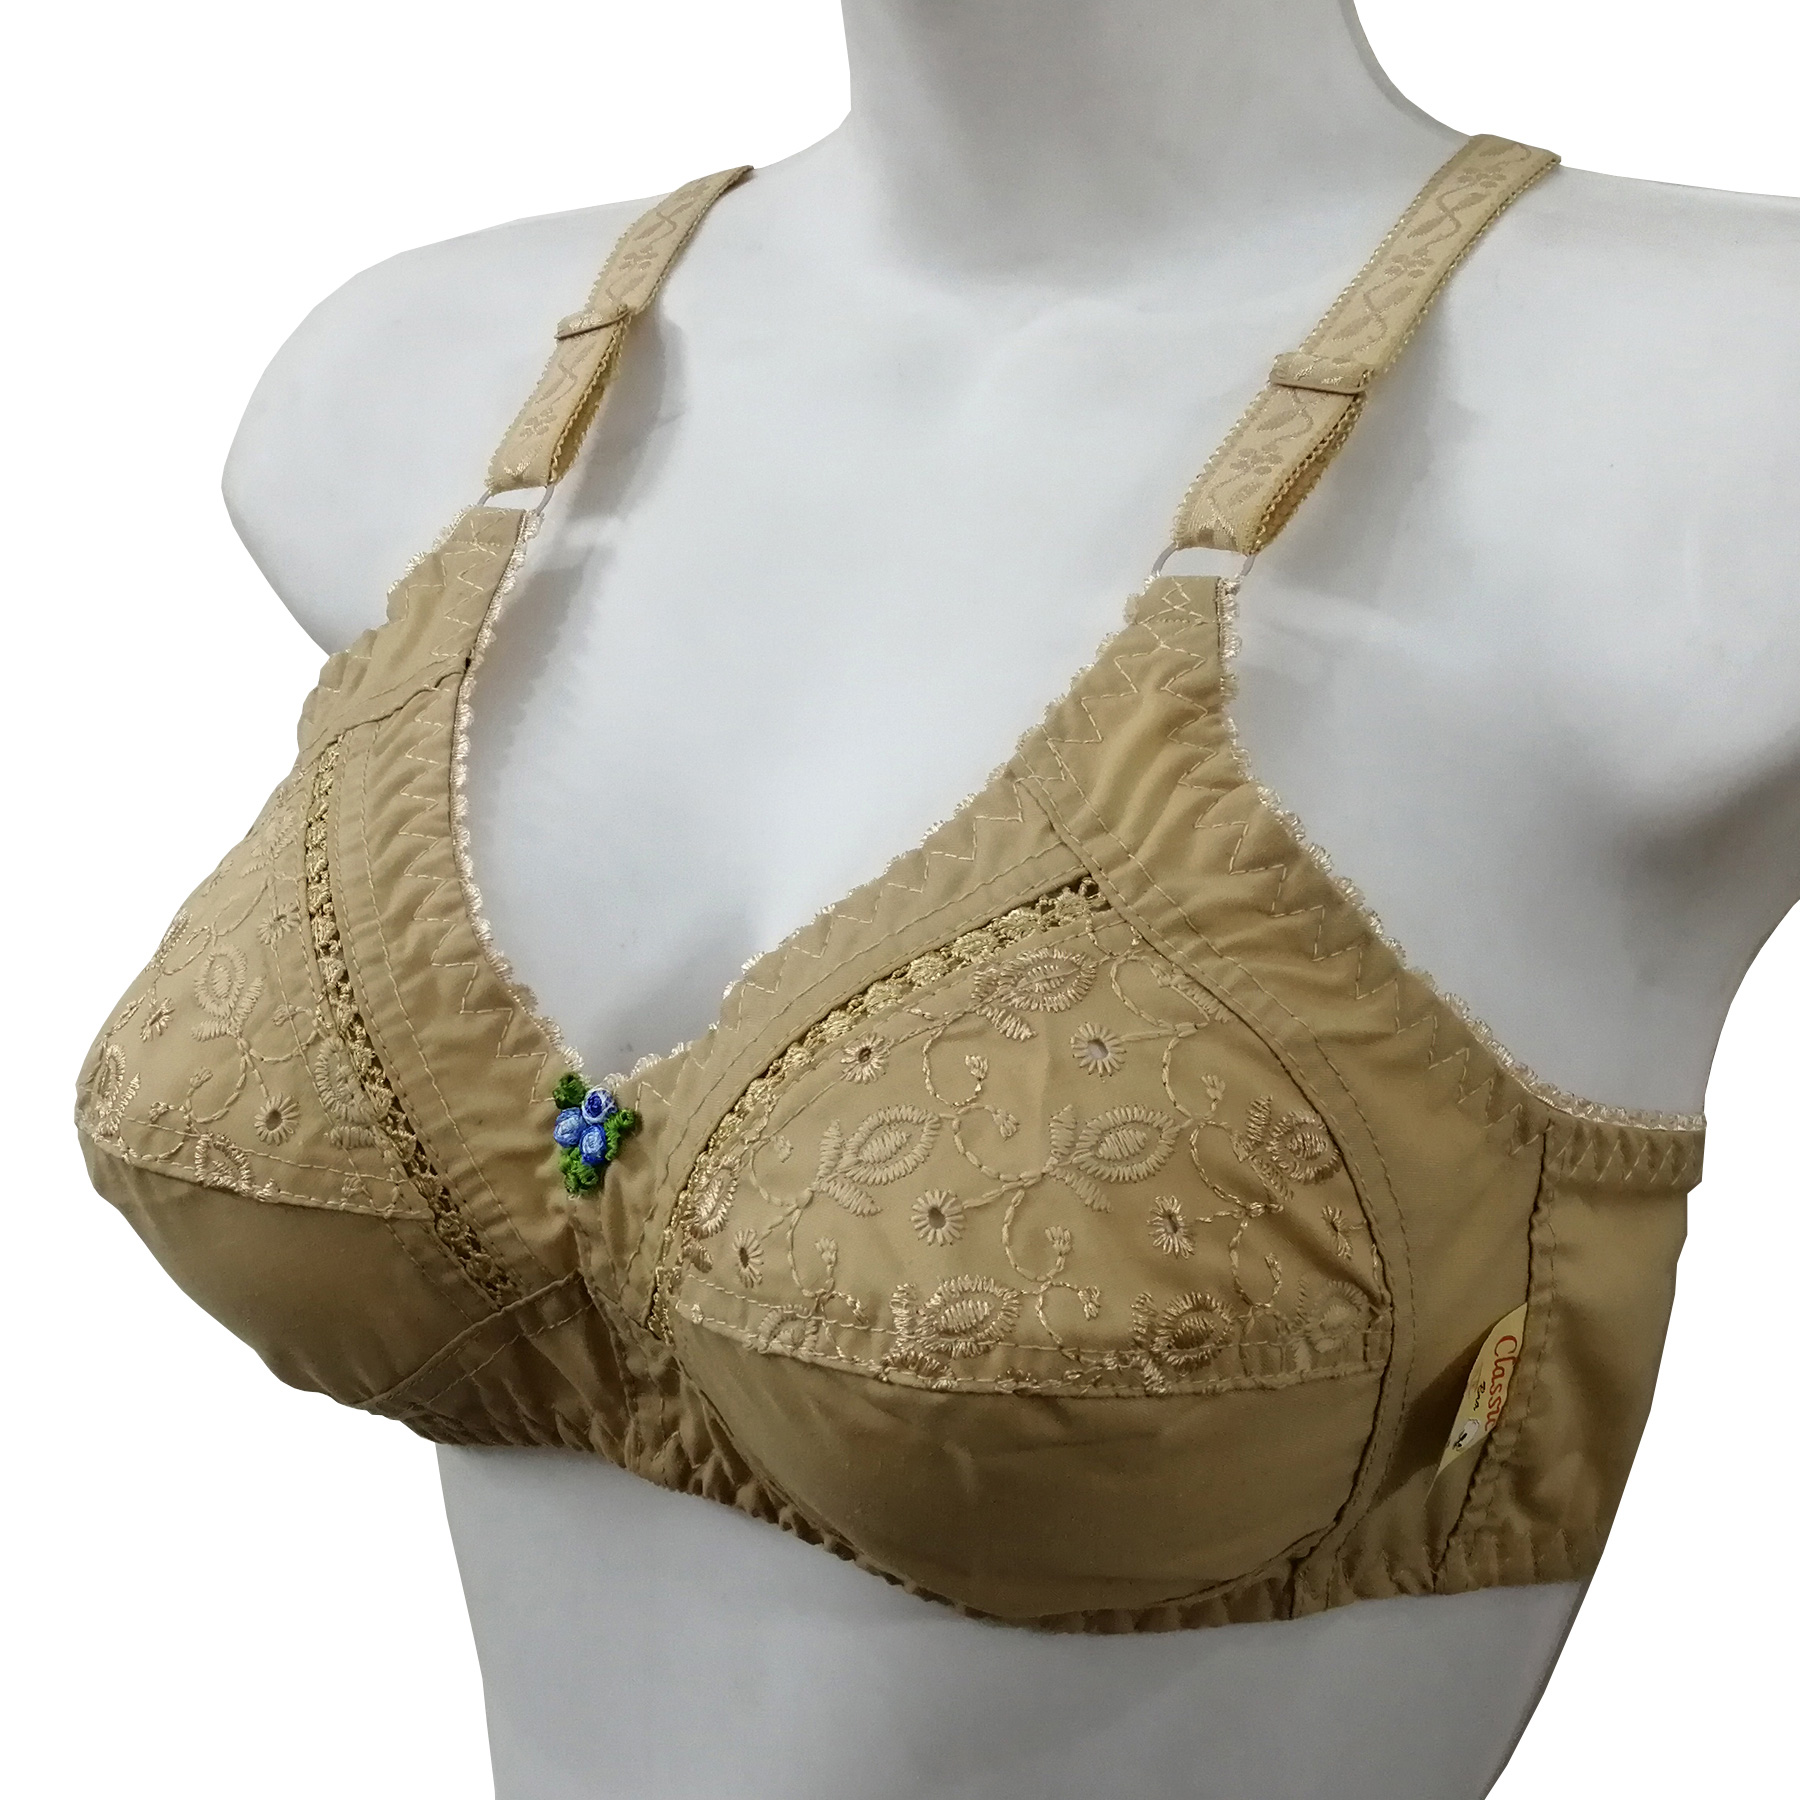 Good Quality Classic Cotton Bras for Women Non Padded Bra for Girls Non  wired Brassiere with Chikan in Beige 34 to 50 Sizes Bra Available Best Fits